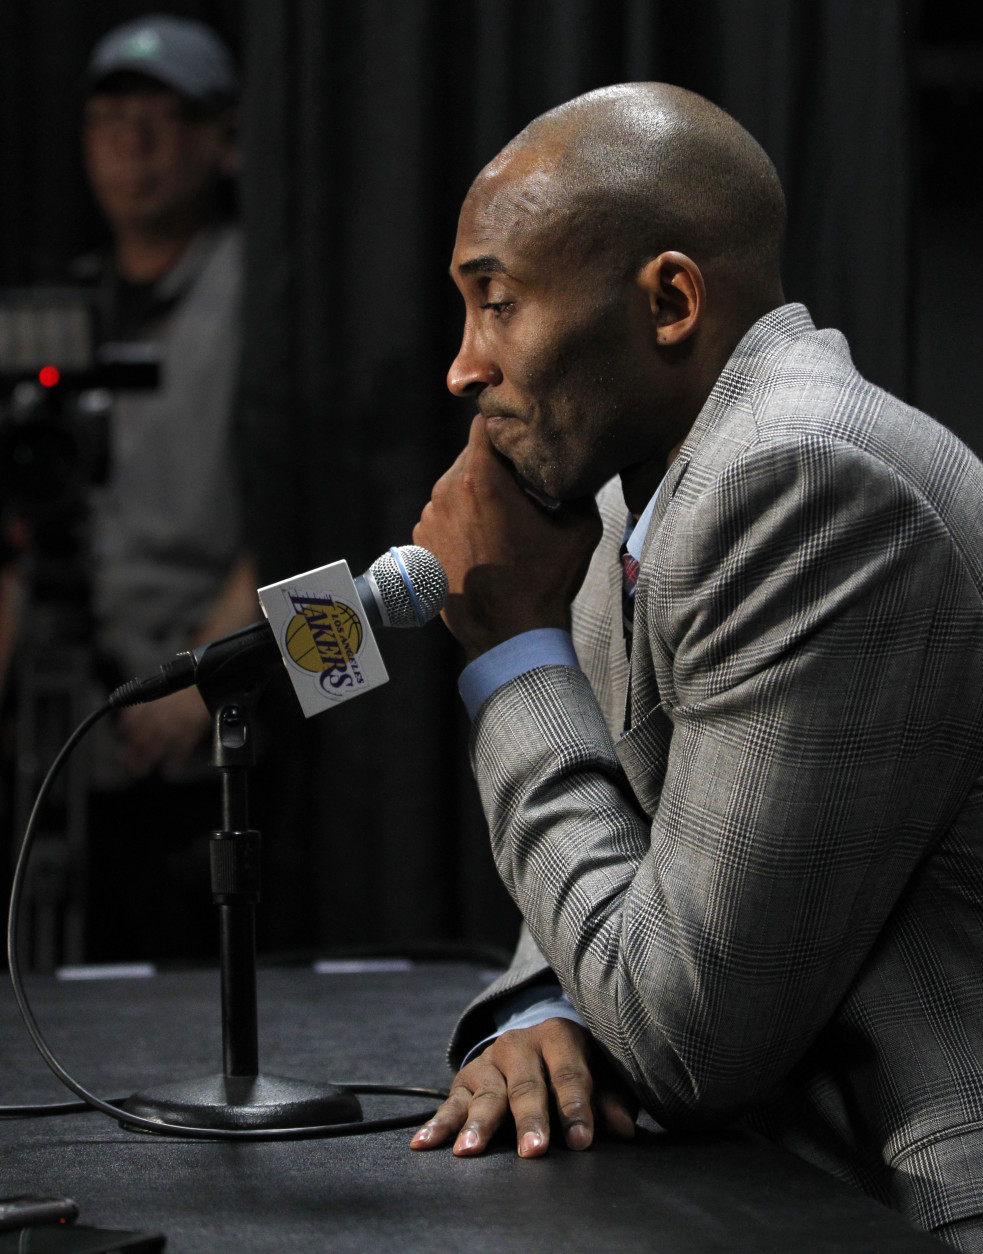 Los Angeles Lakers forward Kobe Bryant reflects at news conference on why he decided to announce his retirement prior to an NBA basketball game against the Indiana Pacers in Los Angeles, Sunday, Nov. 29, 2015. The Pacers won 107-103. (AP Photo/Alex Gallardo)